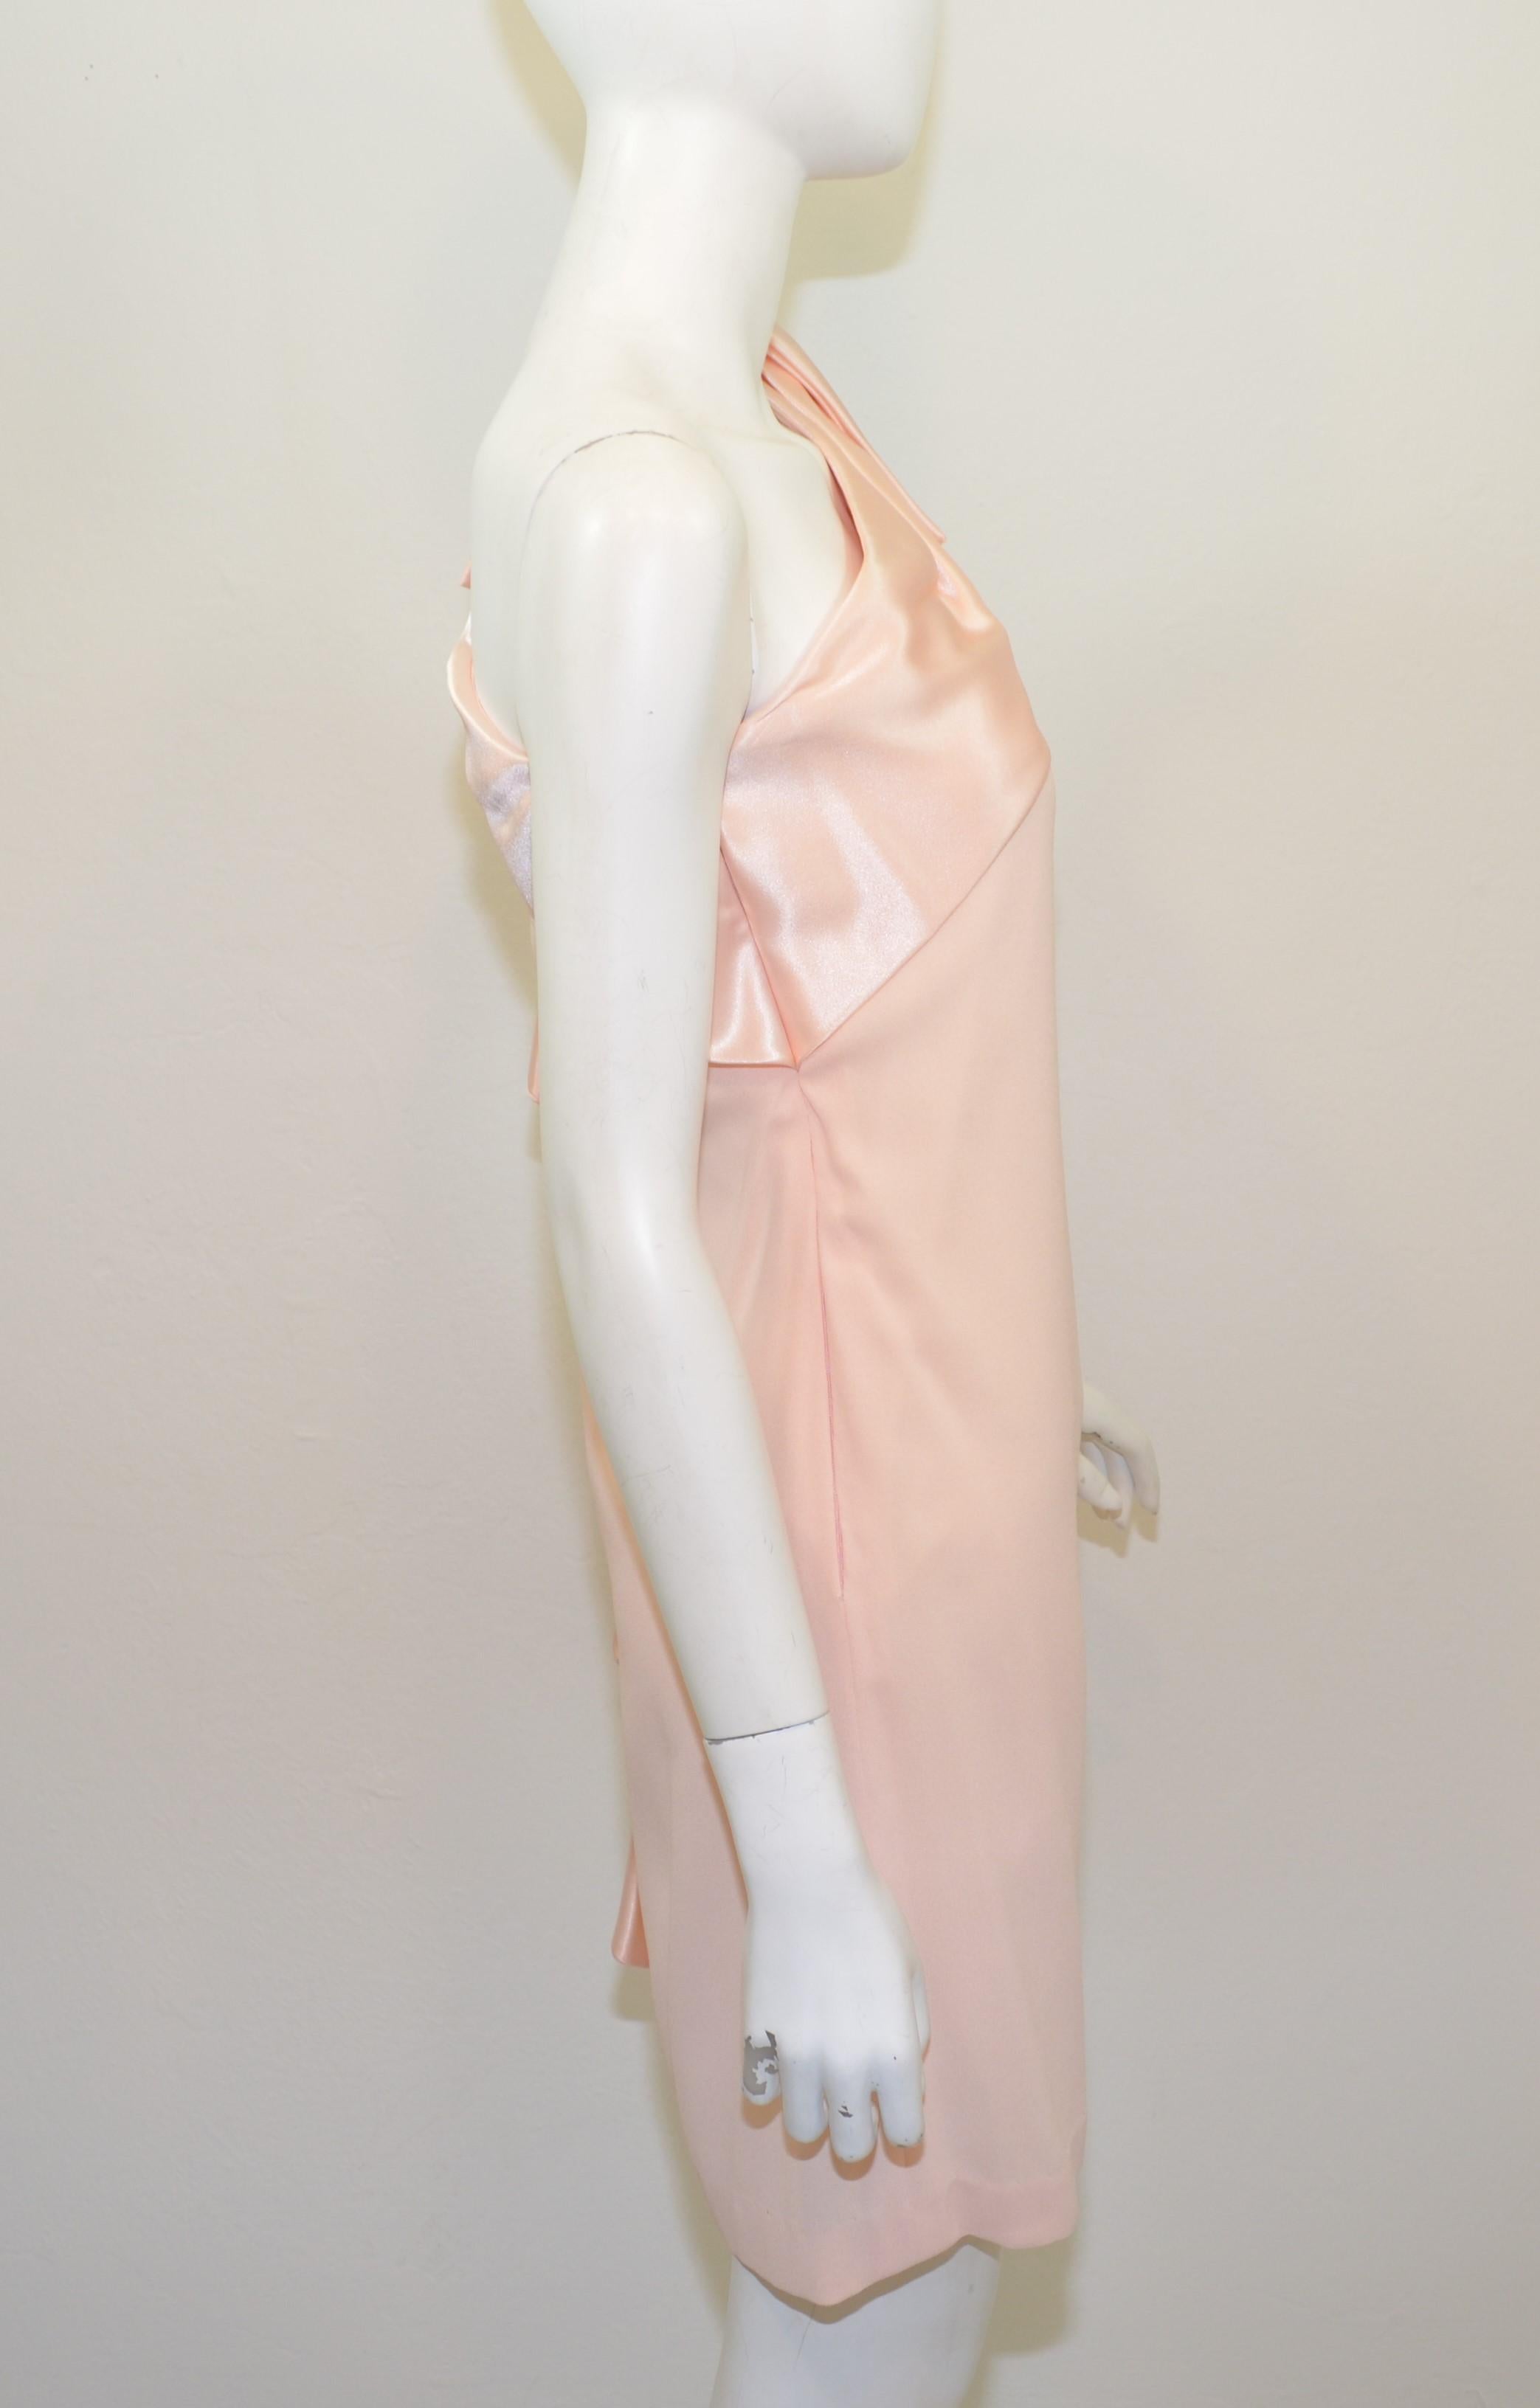 Vintage Bill Blass Pink One-Shoulder Dress In Excellent Condition For Sale In Carmel, CA